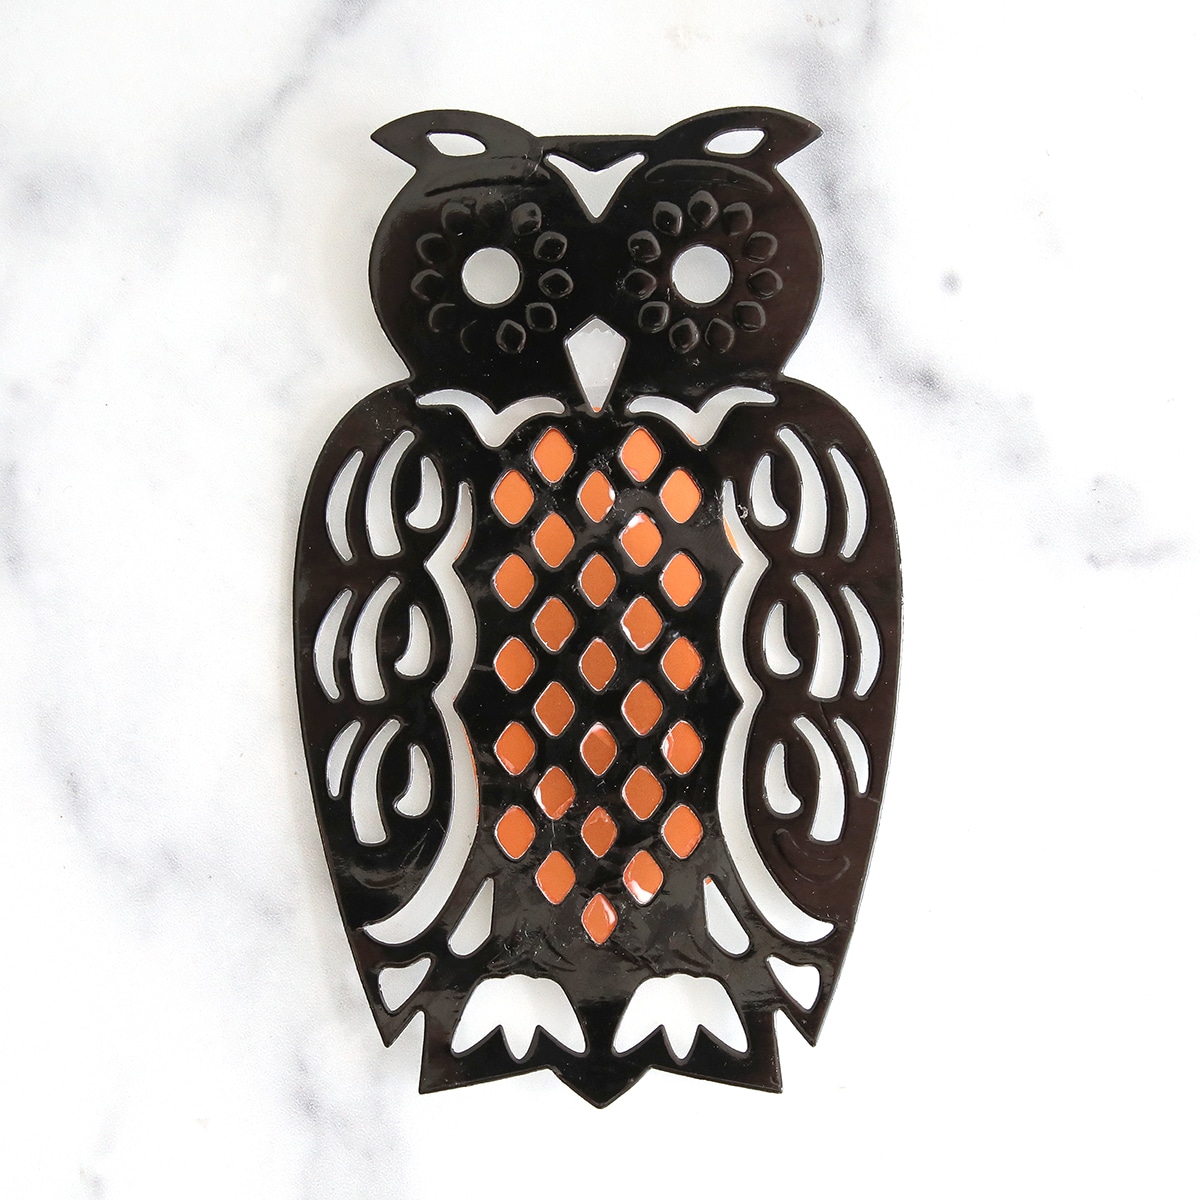 A black and orange owl on a marble countertop.